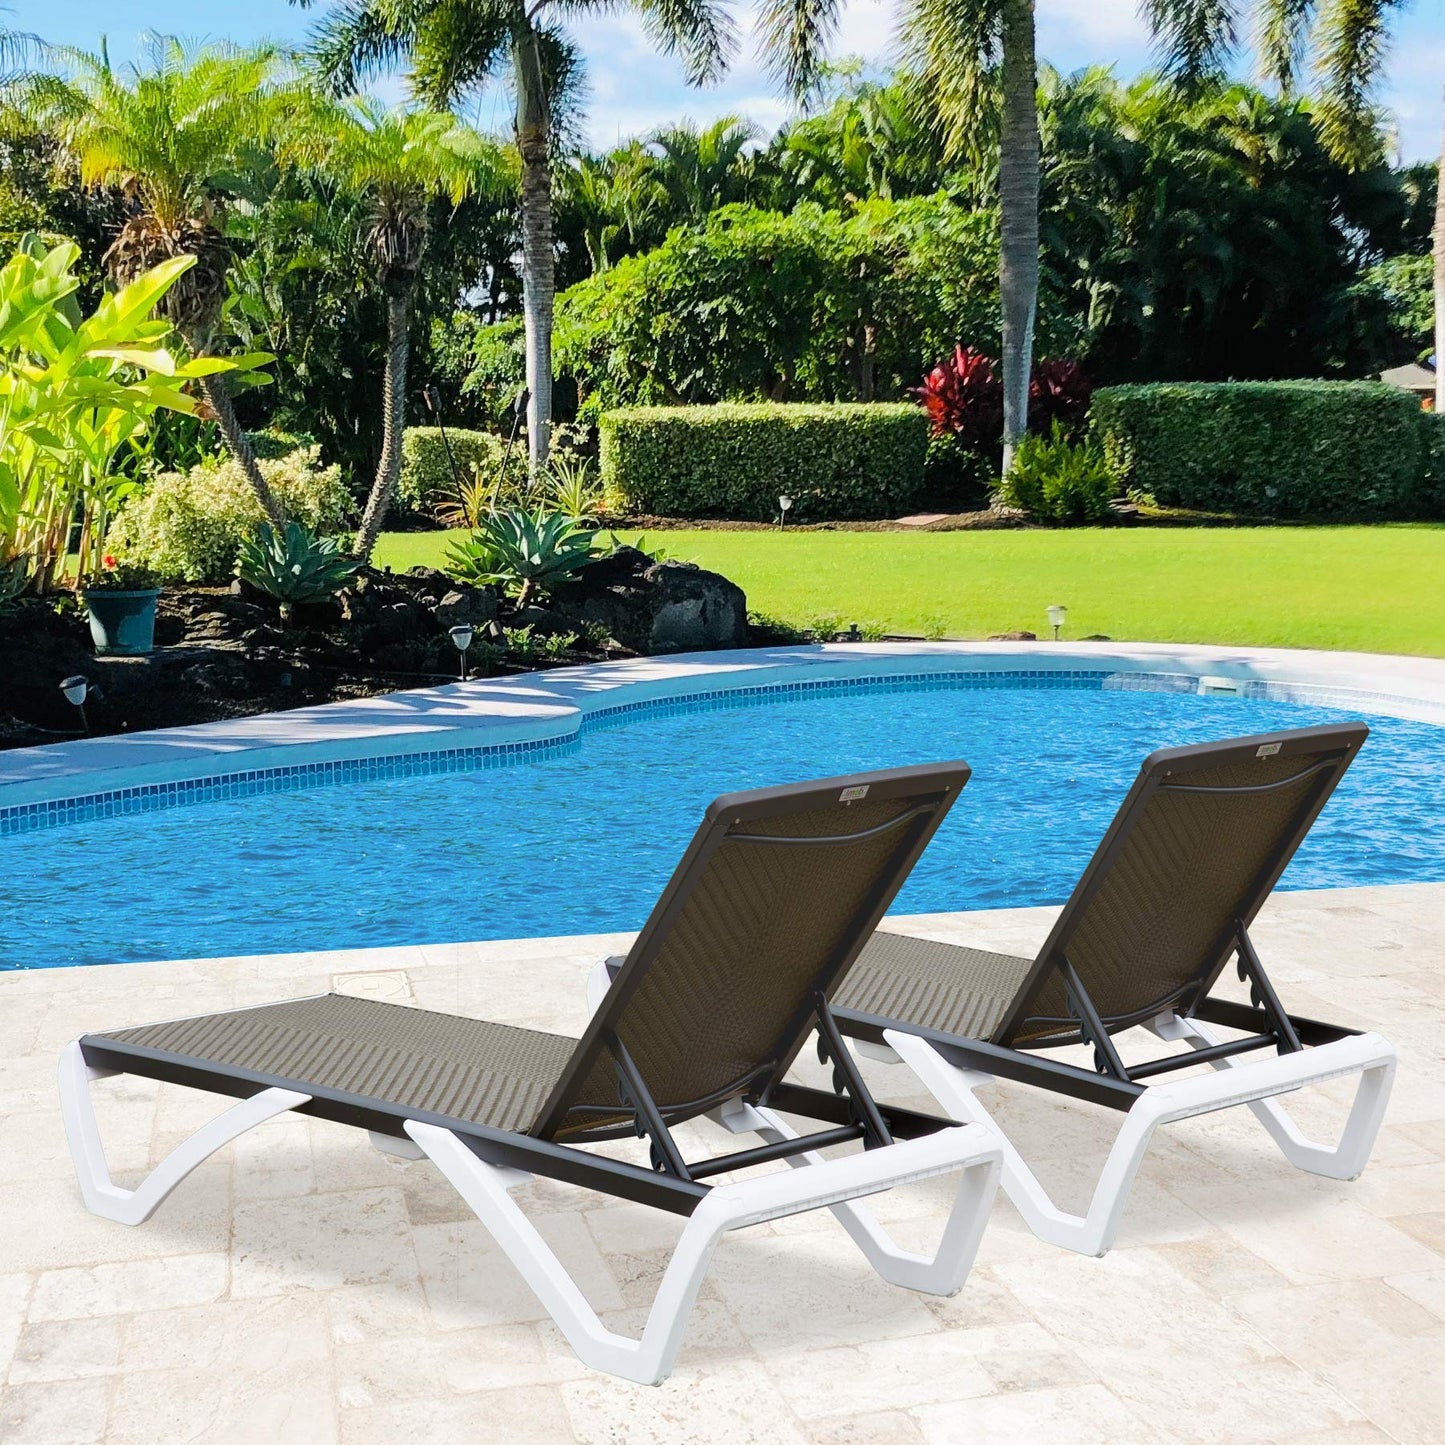 Patio Chaise Lounge Outdoor Aluminum Polypropylene Chair with Adjustable Backrest, Beach